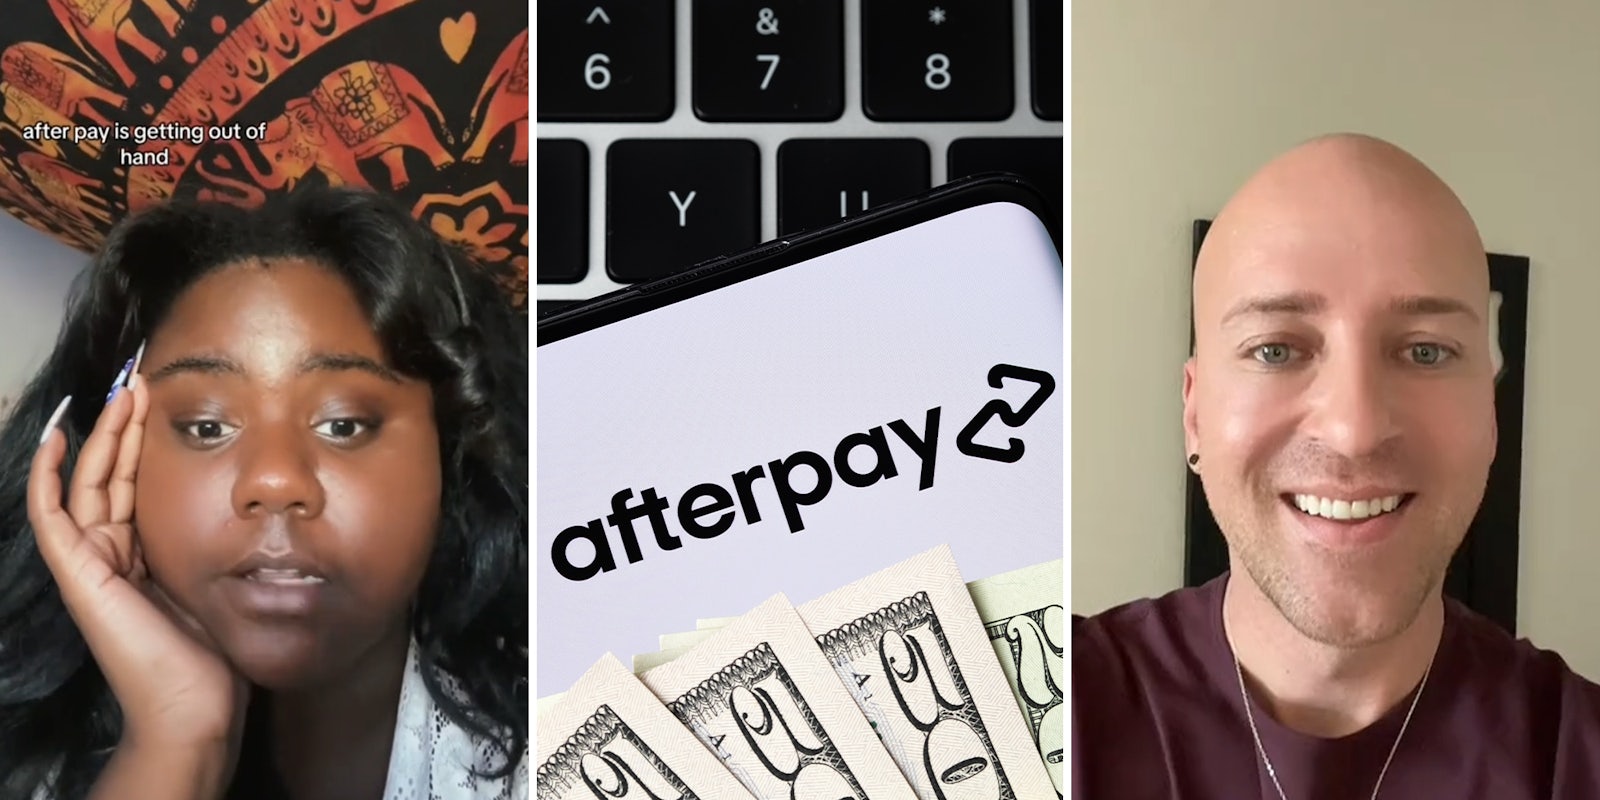 Credit expert starts debate after issuing PSA about Afterpay